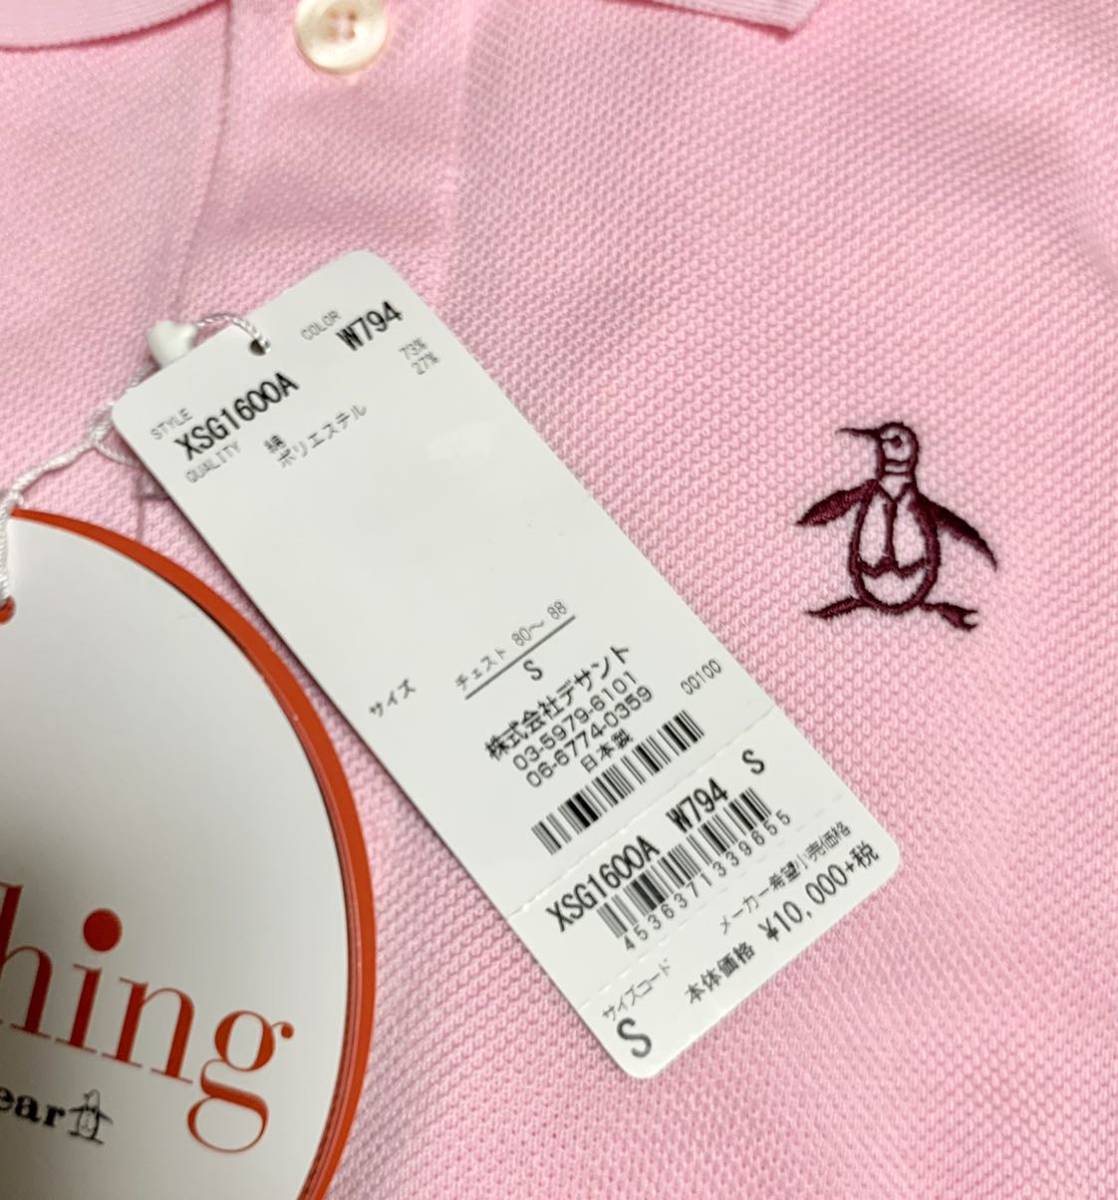 # new goods 63%OFF regular price 11,000- Munsingwear polo-shirt Golf S size short sleeves made in Japan One Thing by Munsingwear XSG1600A W794. pink including carriage.